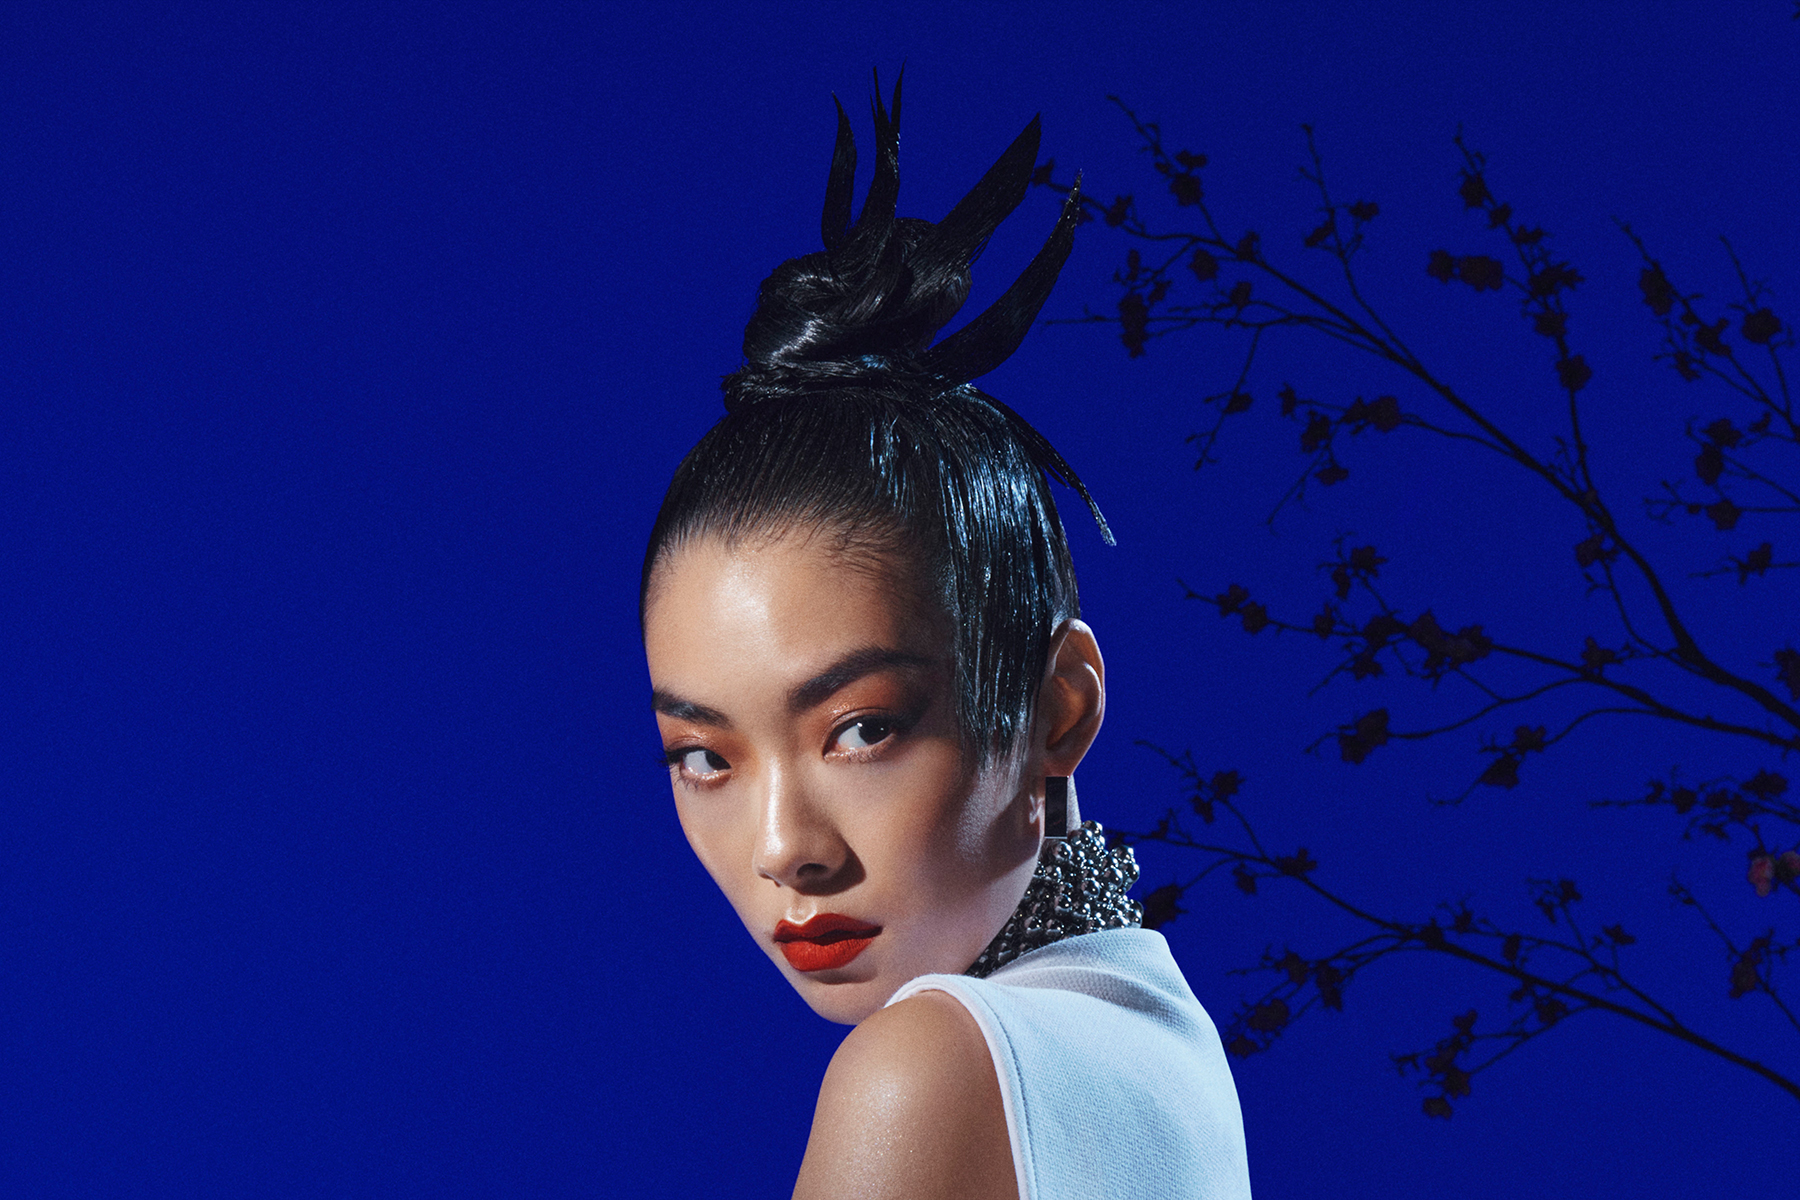 Rina Sawayama Transforms a Therapy Epiphany to Single ‘Hold The Girl’